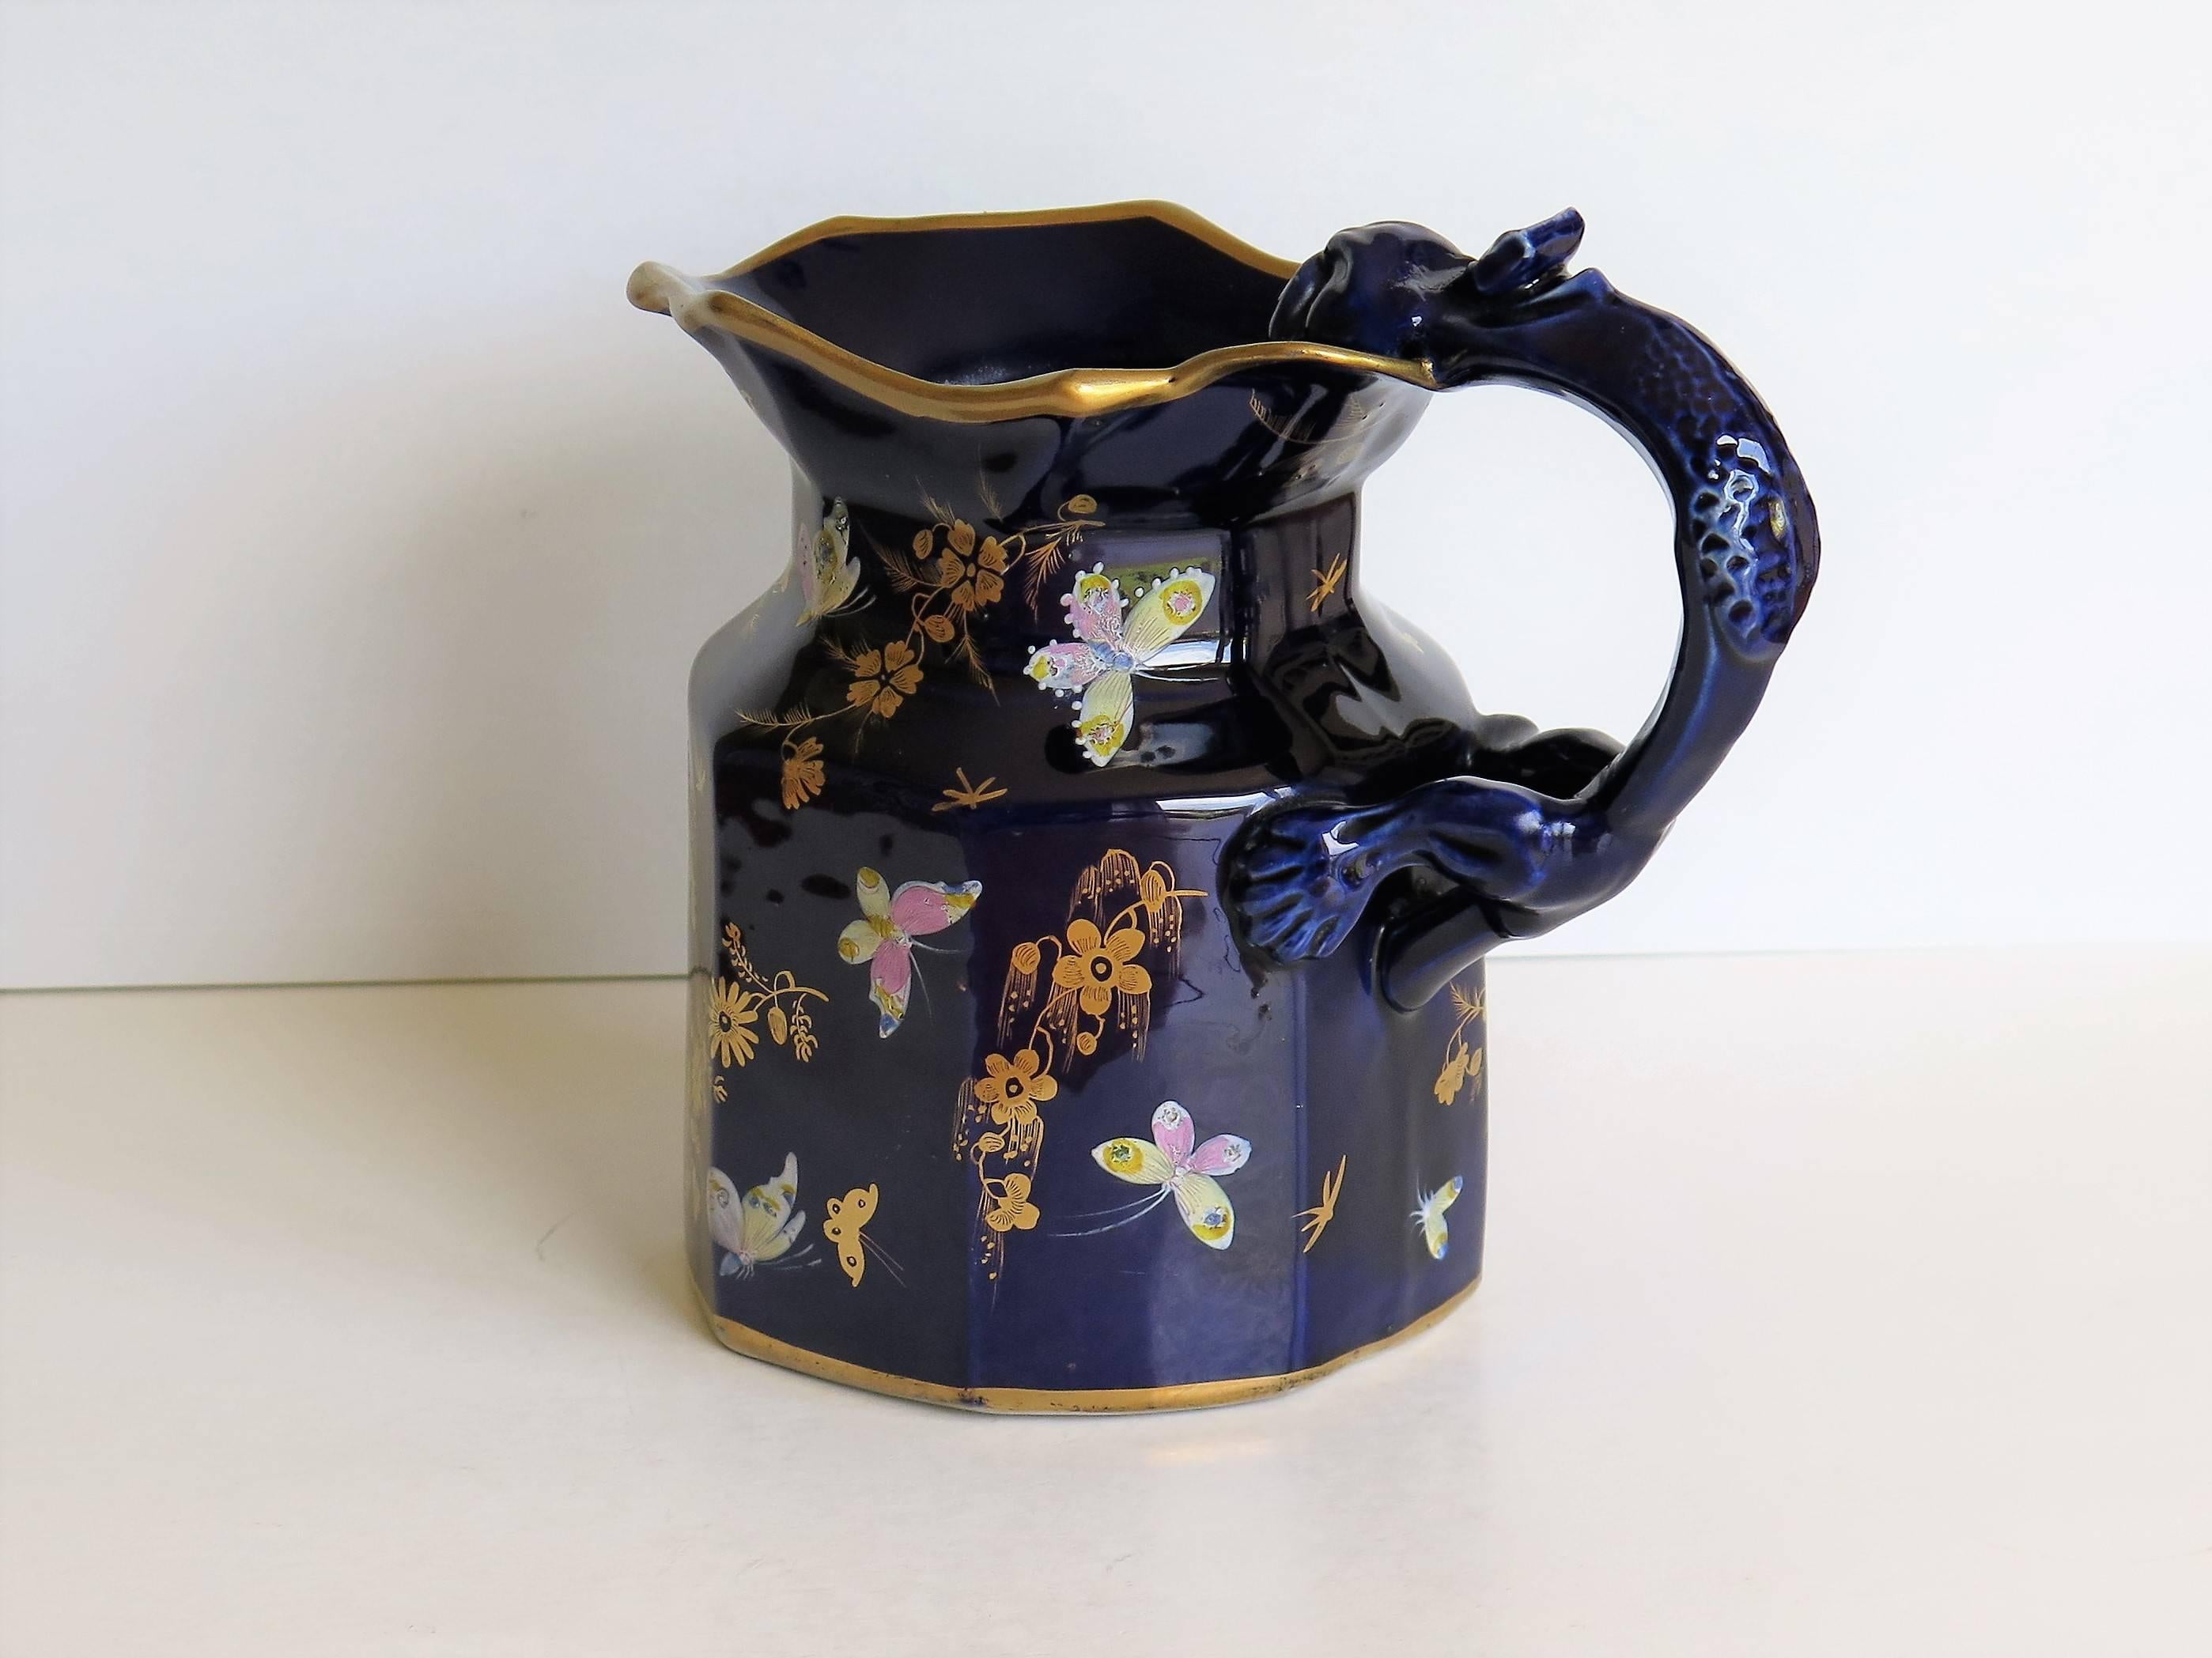 Chinoiserie Early Mason's Jug or Pitcher, Ironstone, Hand-Painted Butterflies, circa 1825